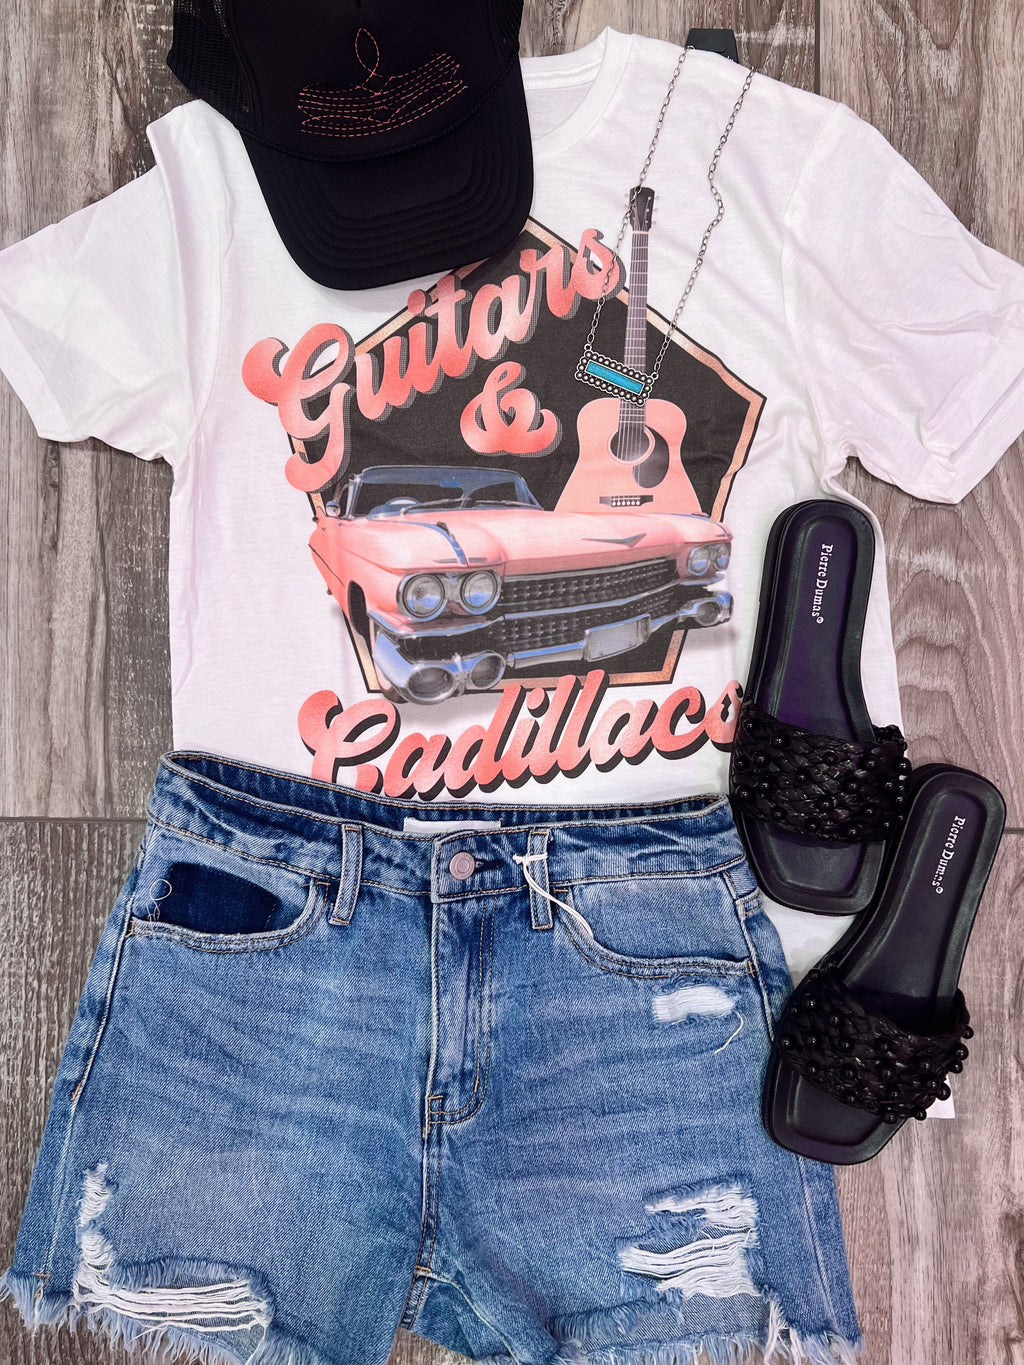 Wild Horse Boutique Shirts & Tops The Guitars and Cadillacs Tee